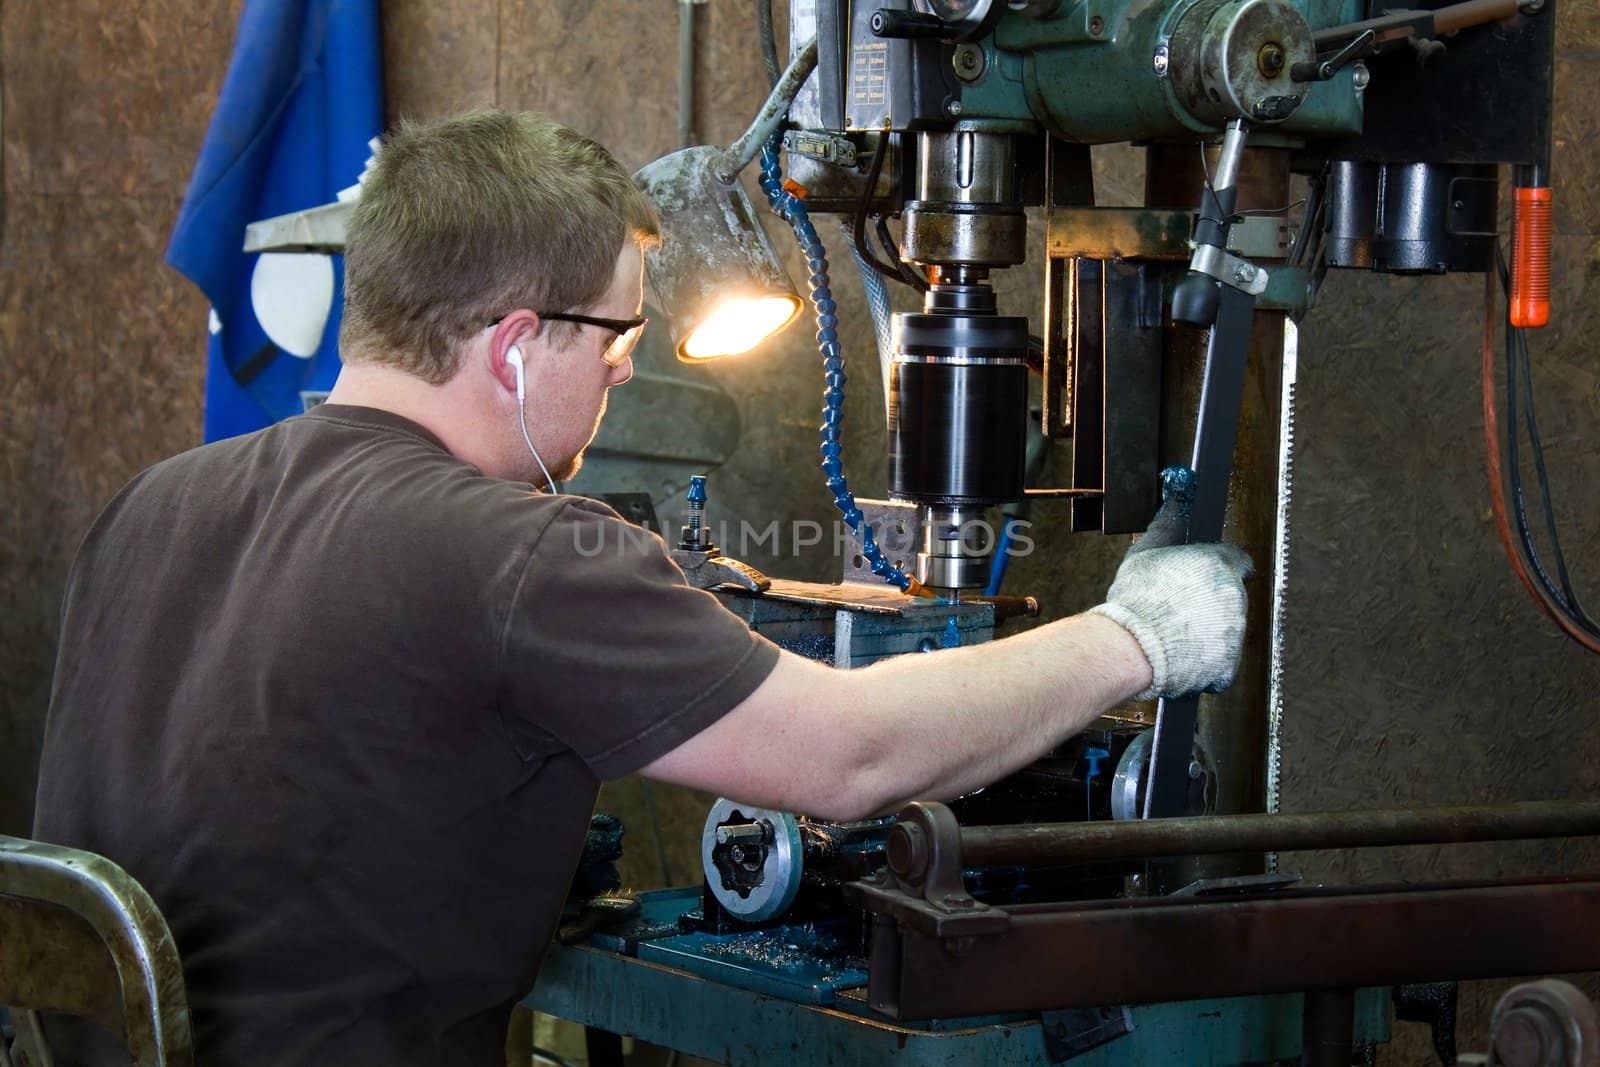 Machinist taps threads into steel using a drill press in production work in a metal shop.